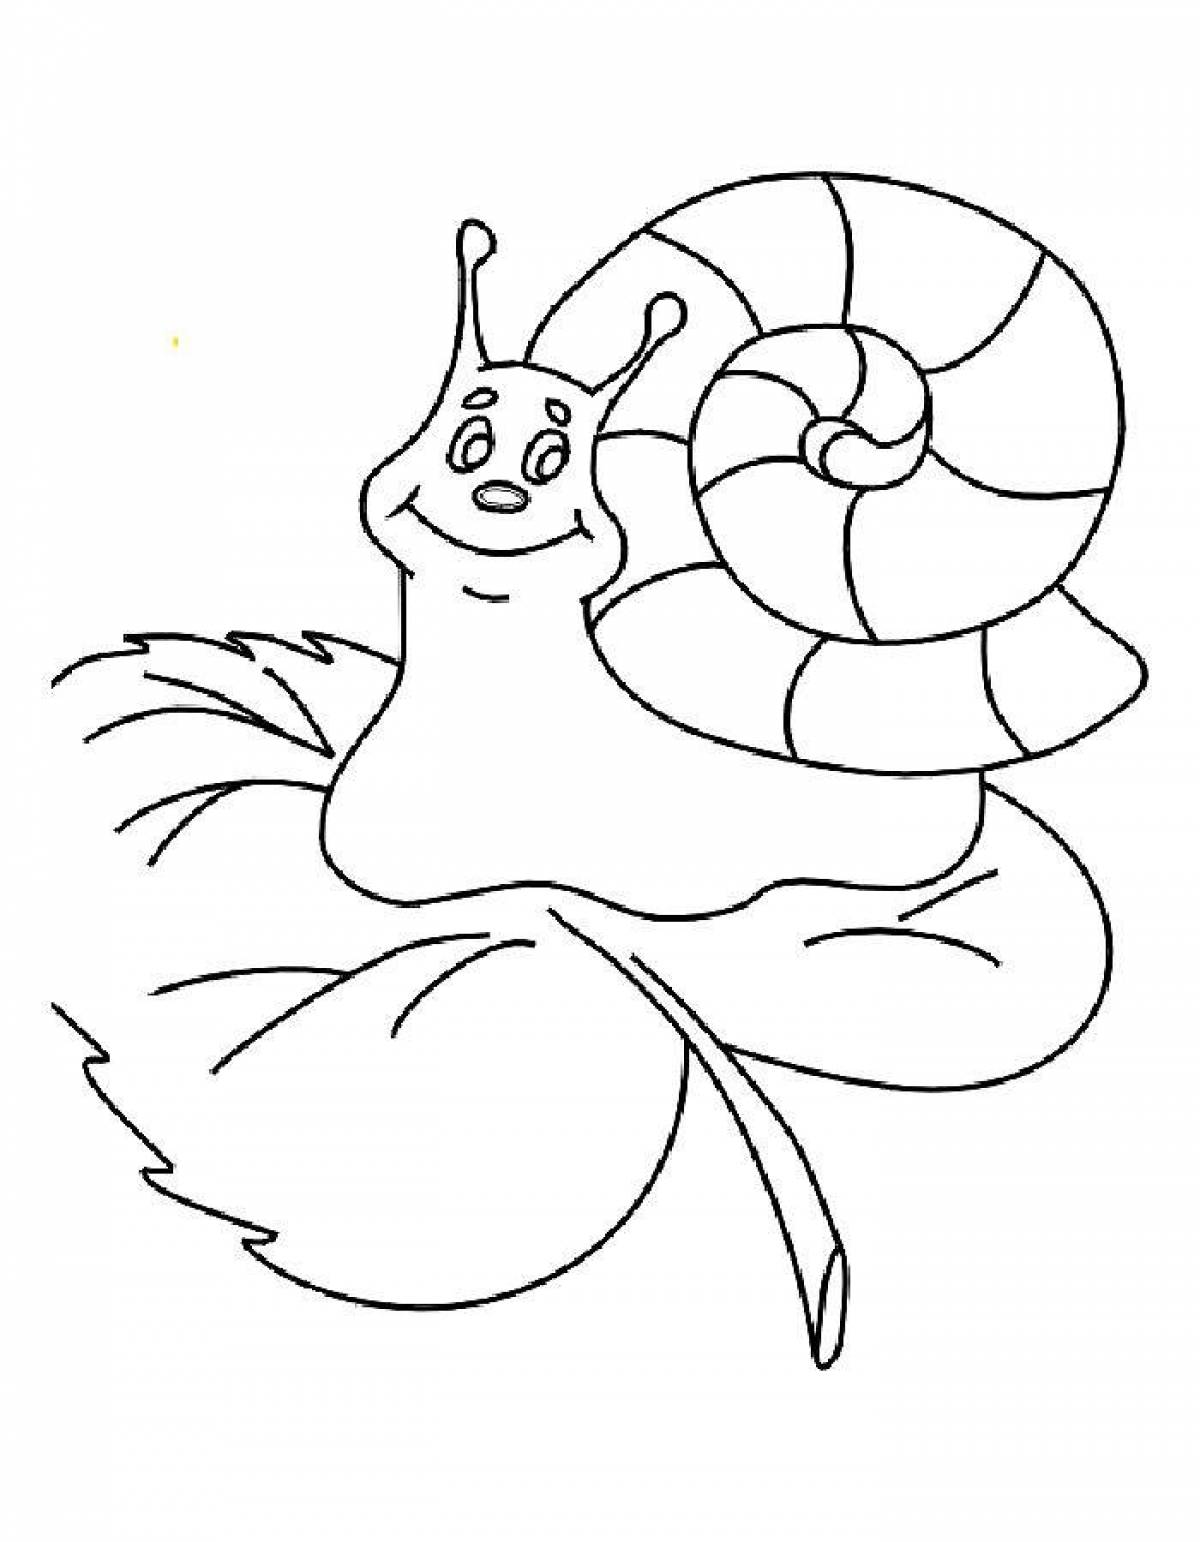 Great snail coloring book for kids